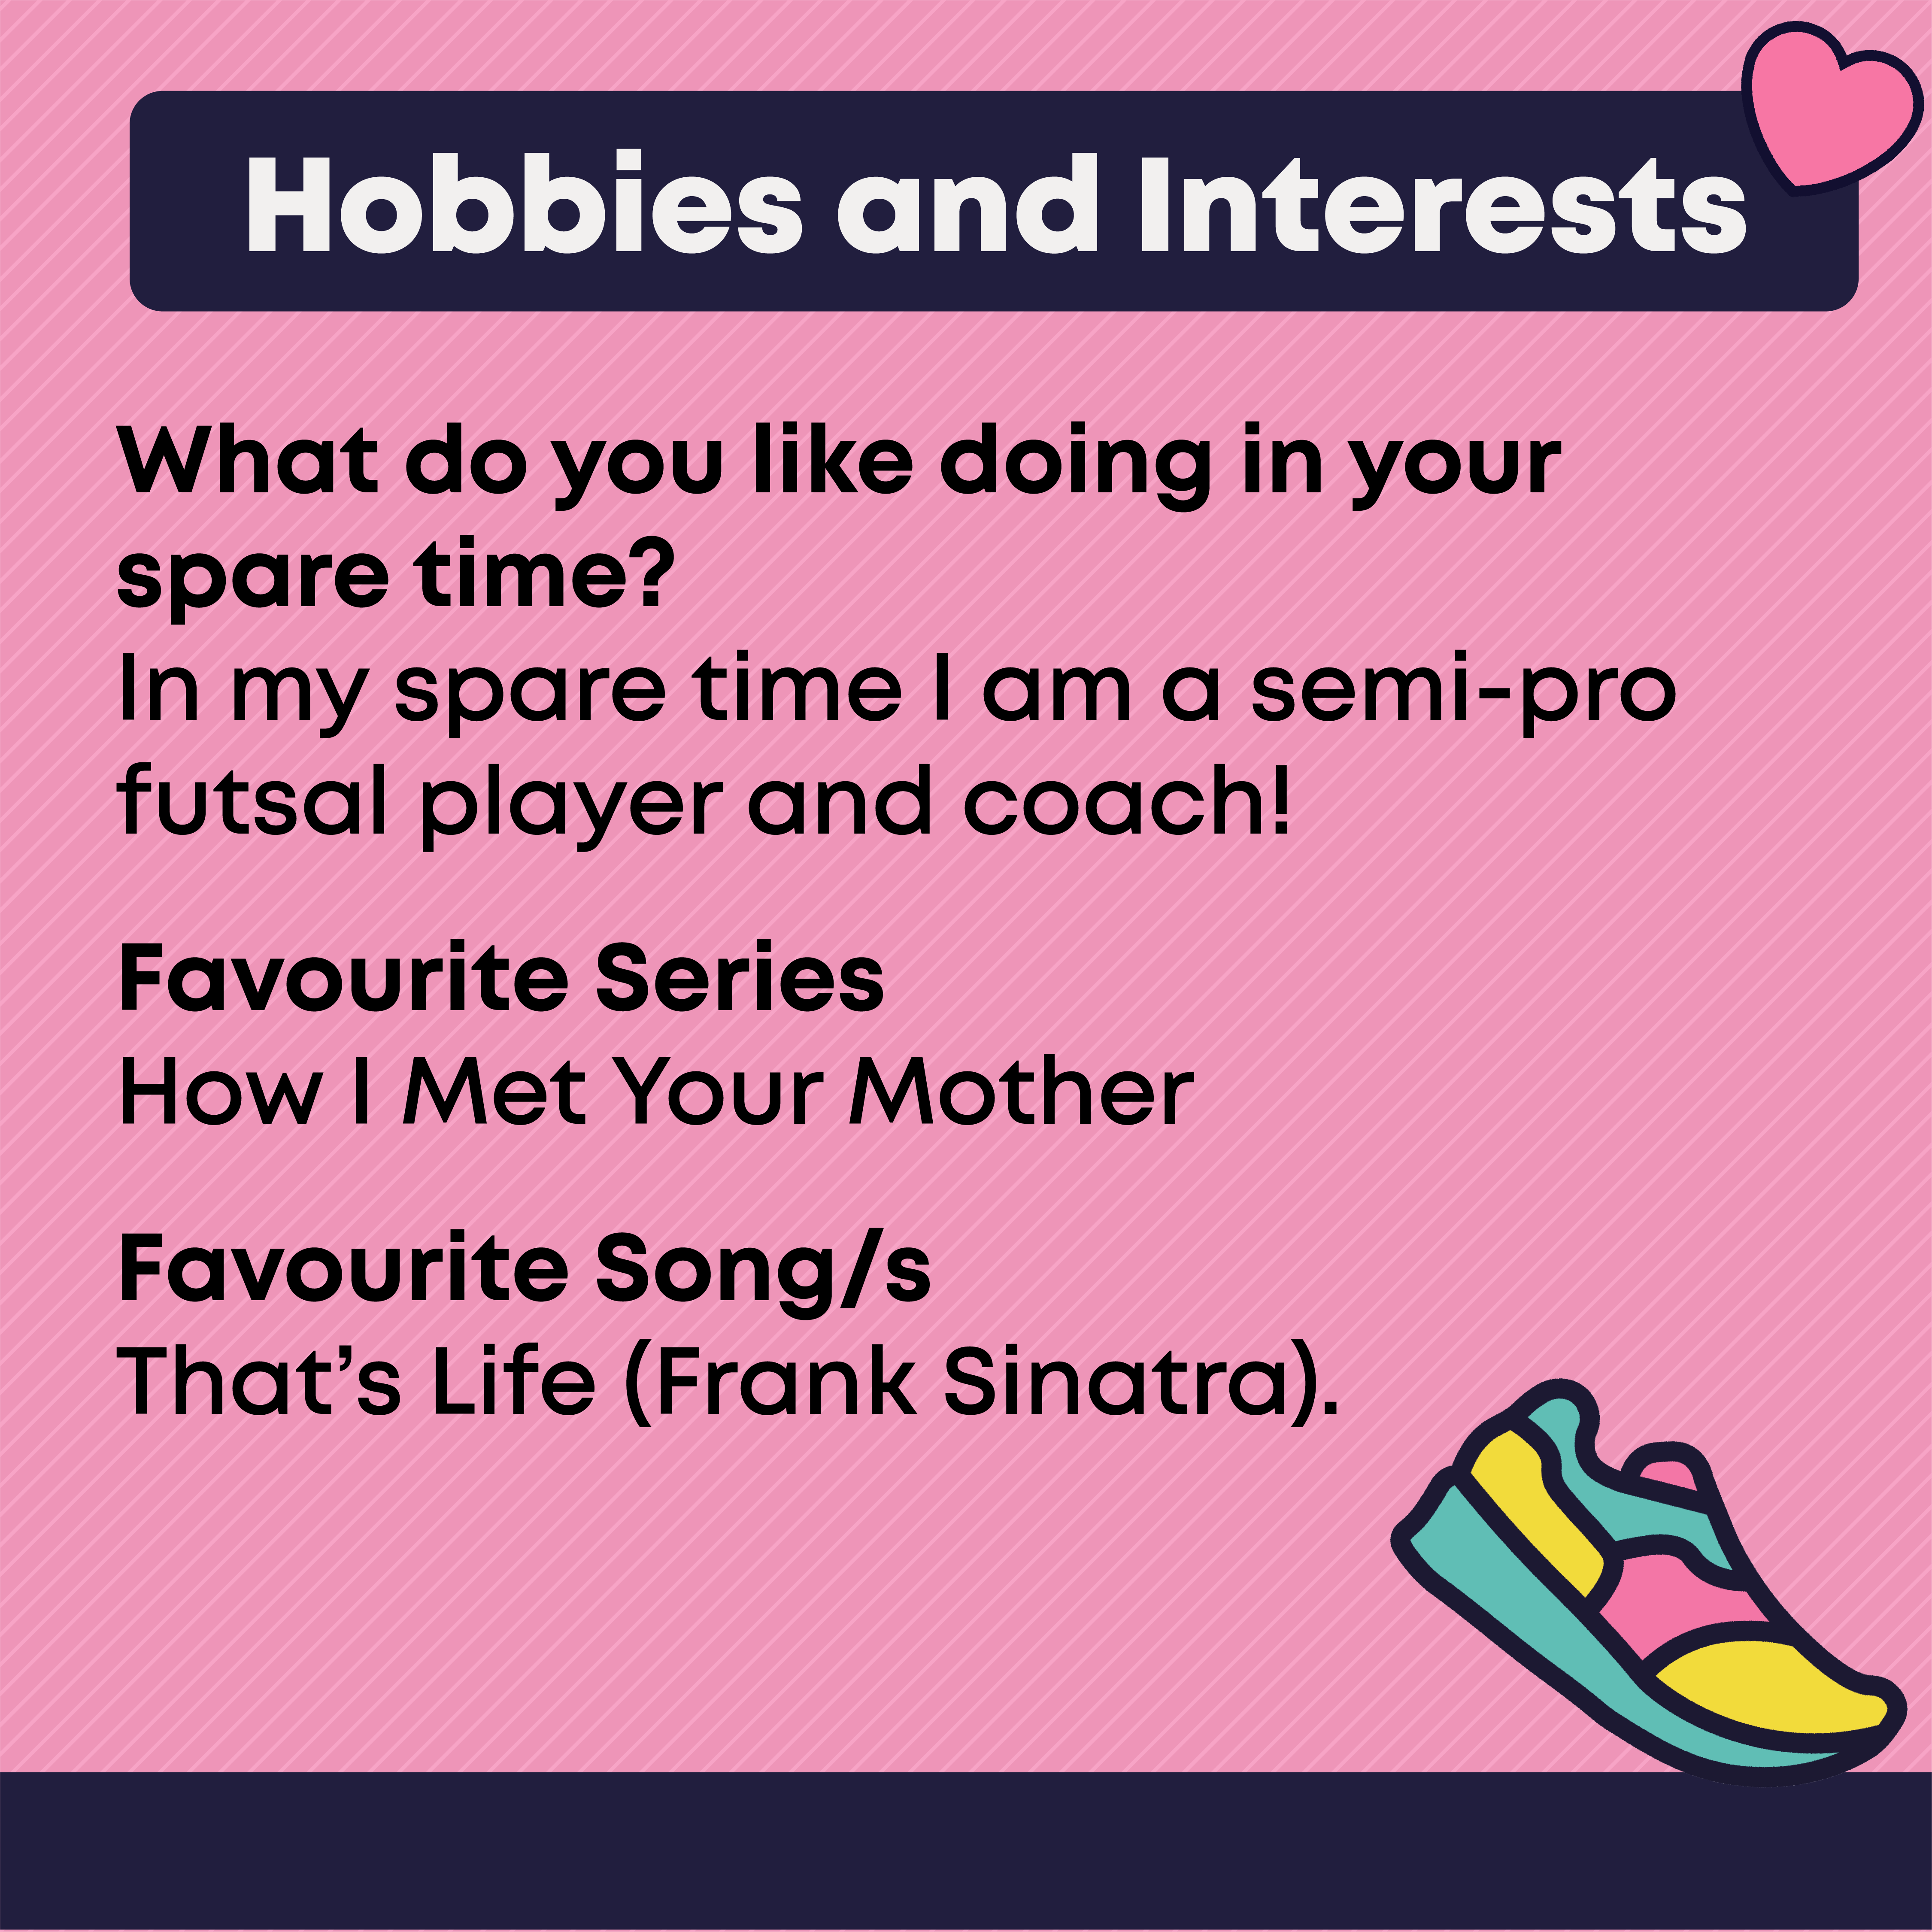 Hobbies and Interests  What you like doing in your spare time: In my spare time I am a semi-pro futsal player and coach!  Favourite Series: How I Met Your Mother  Favourite Song/s : That’s Life (Frank Sinatra)